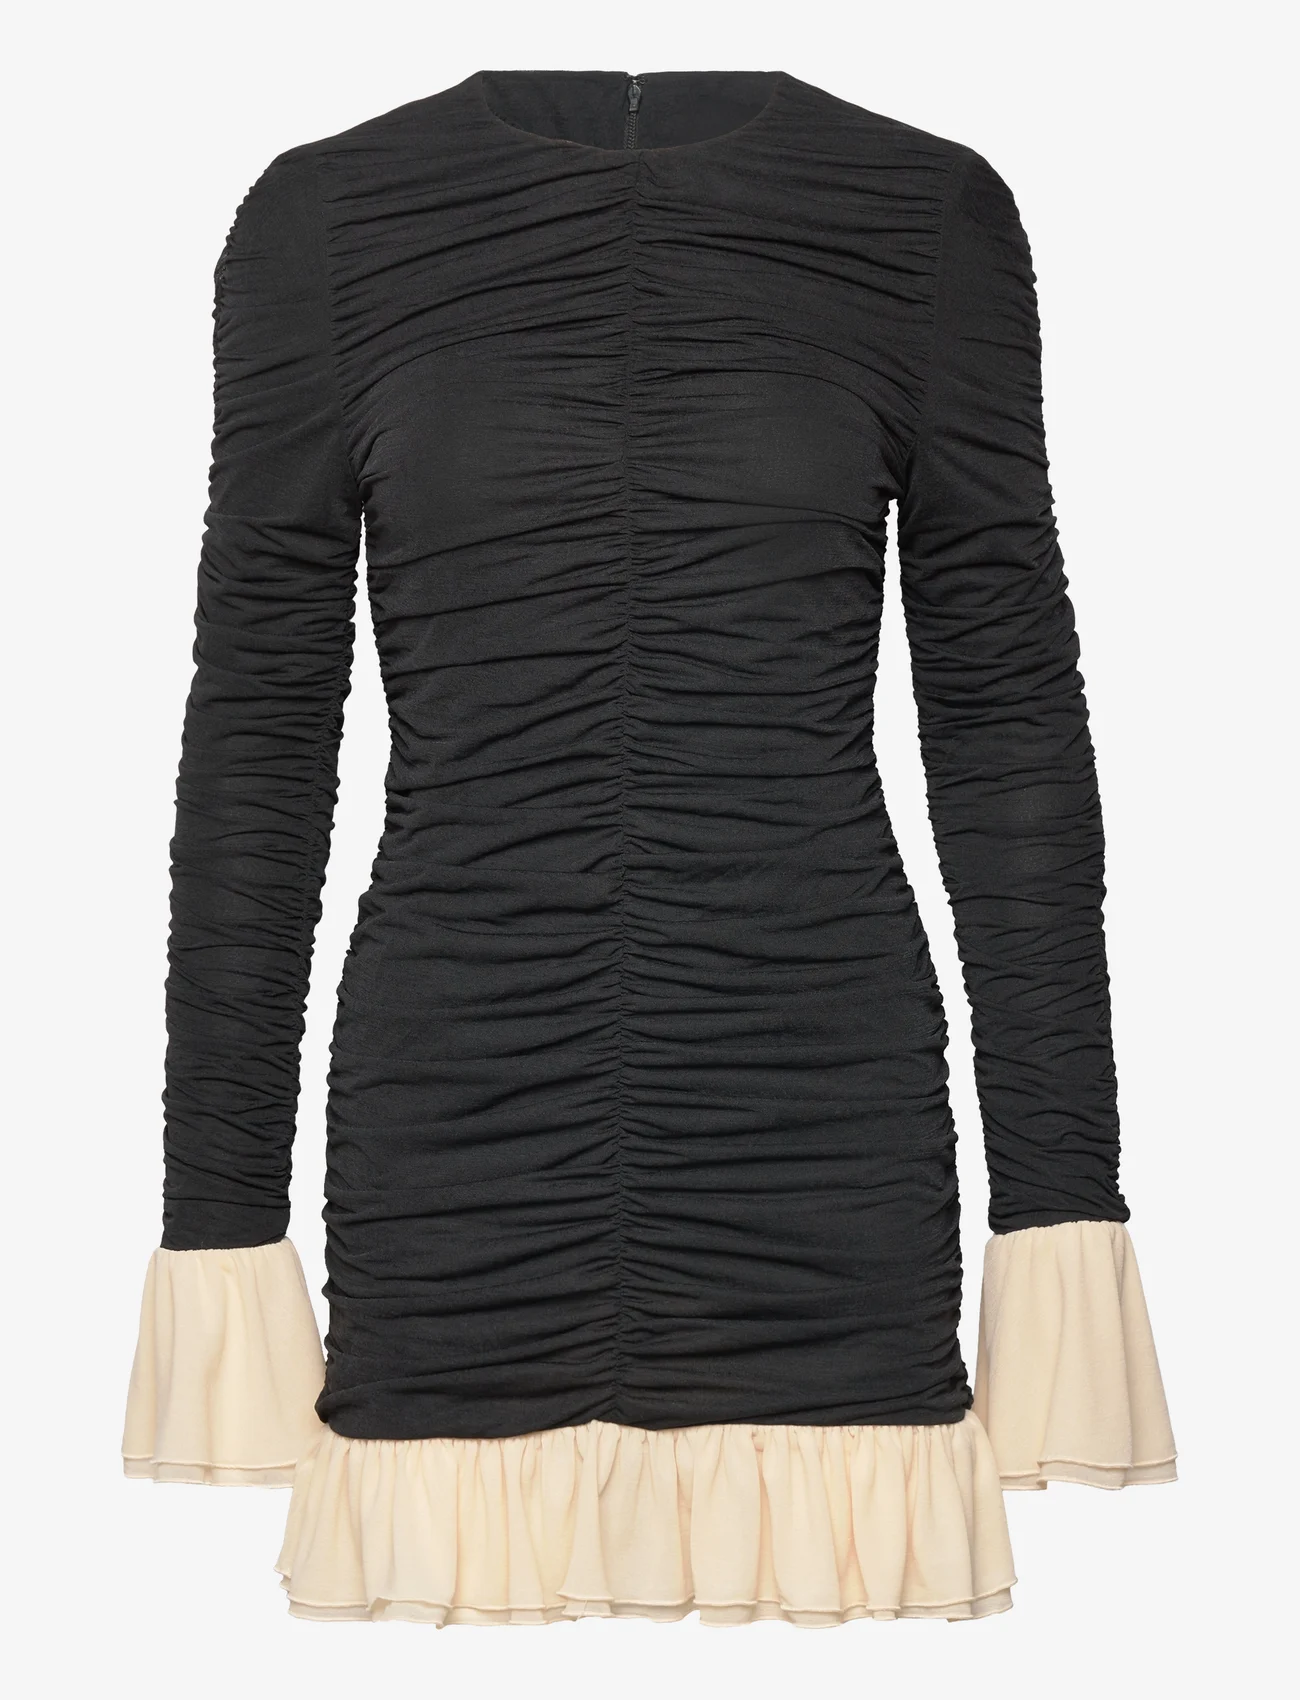 ROTATE Birger Christensen - Mini Ruched Ls Dress - peoriided outlet-hindadega - 1000 black comb. - 0